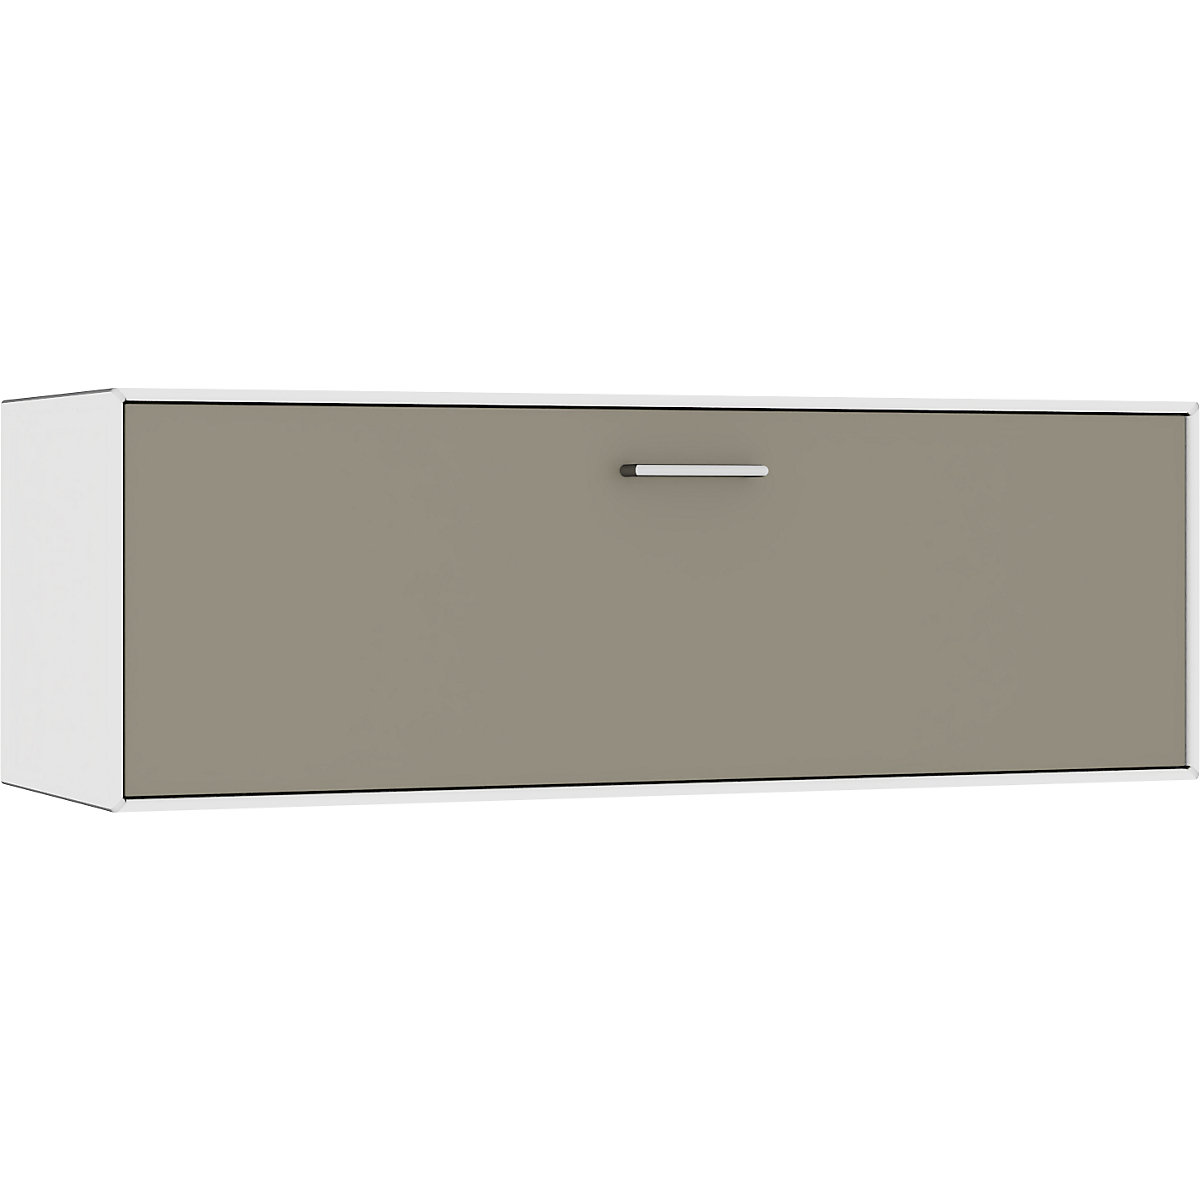 Single box, suspended – mauser, 1 bar cabinet drop-down tray, width 1155 mm, pure white / beige grey-5